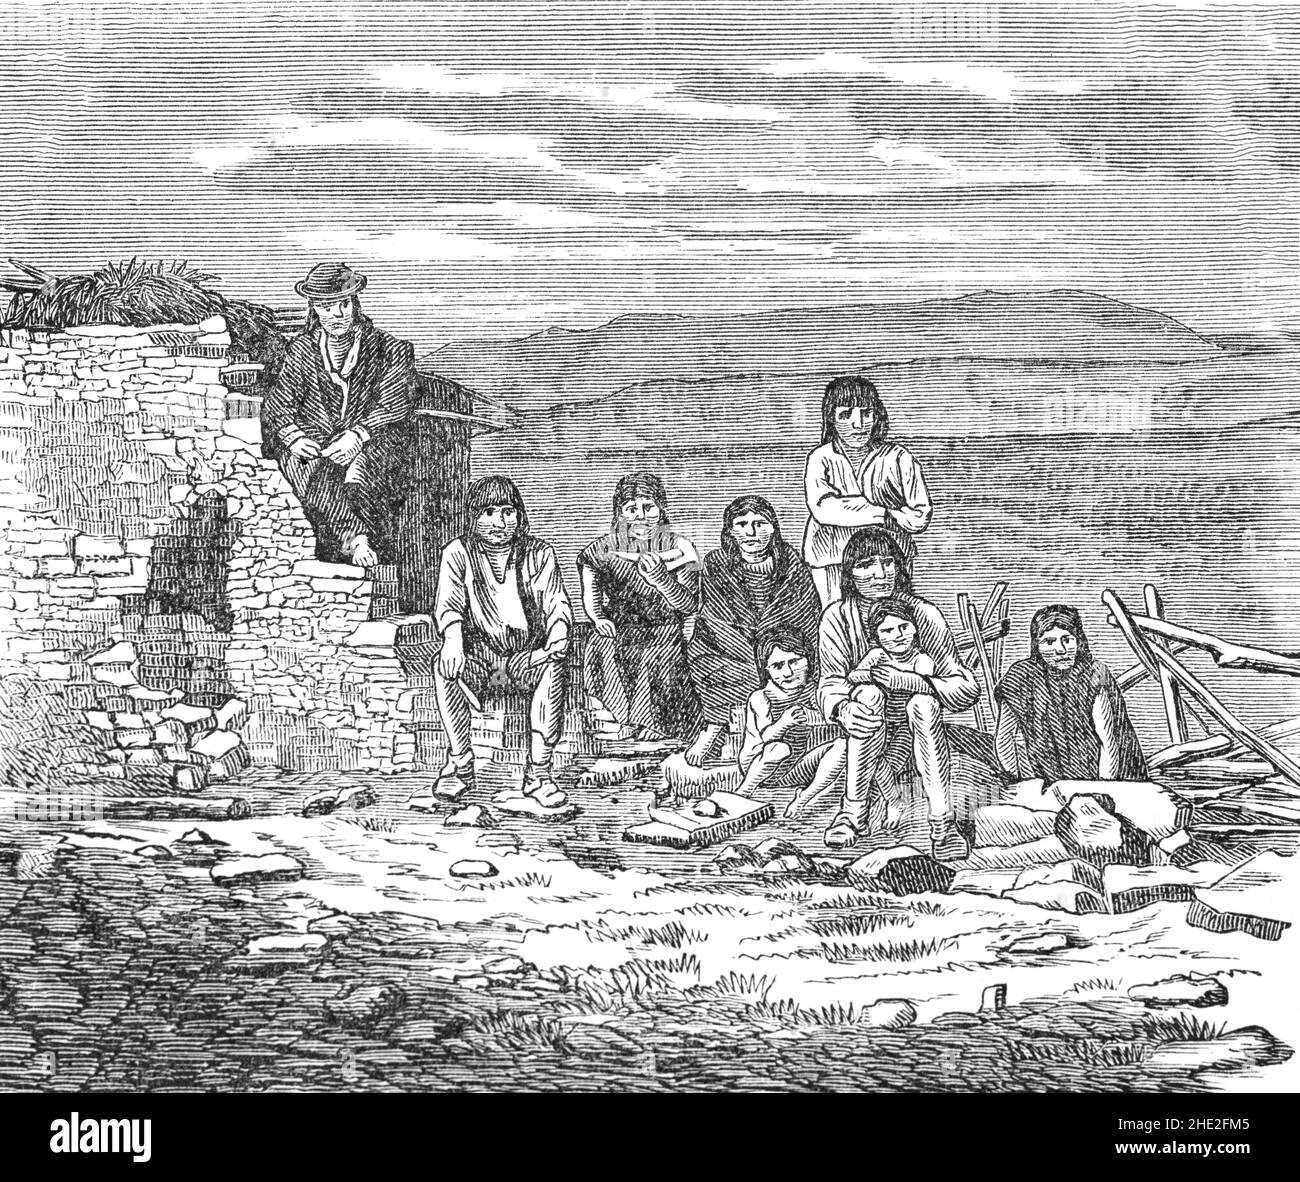 A late 19th Century illustration of a Mexican Indigenous family. Native Mexicans, aka Mexican Native Americans are those who are part of communities that trace their roots back to populations and communities that existed in what is now Mexico prior to the arrival of the Spanish in the 16th century. Stock Photo